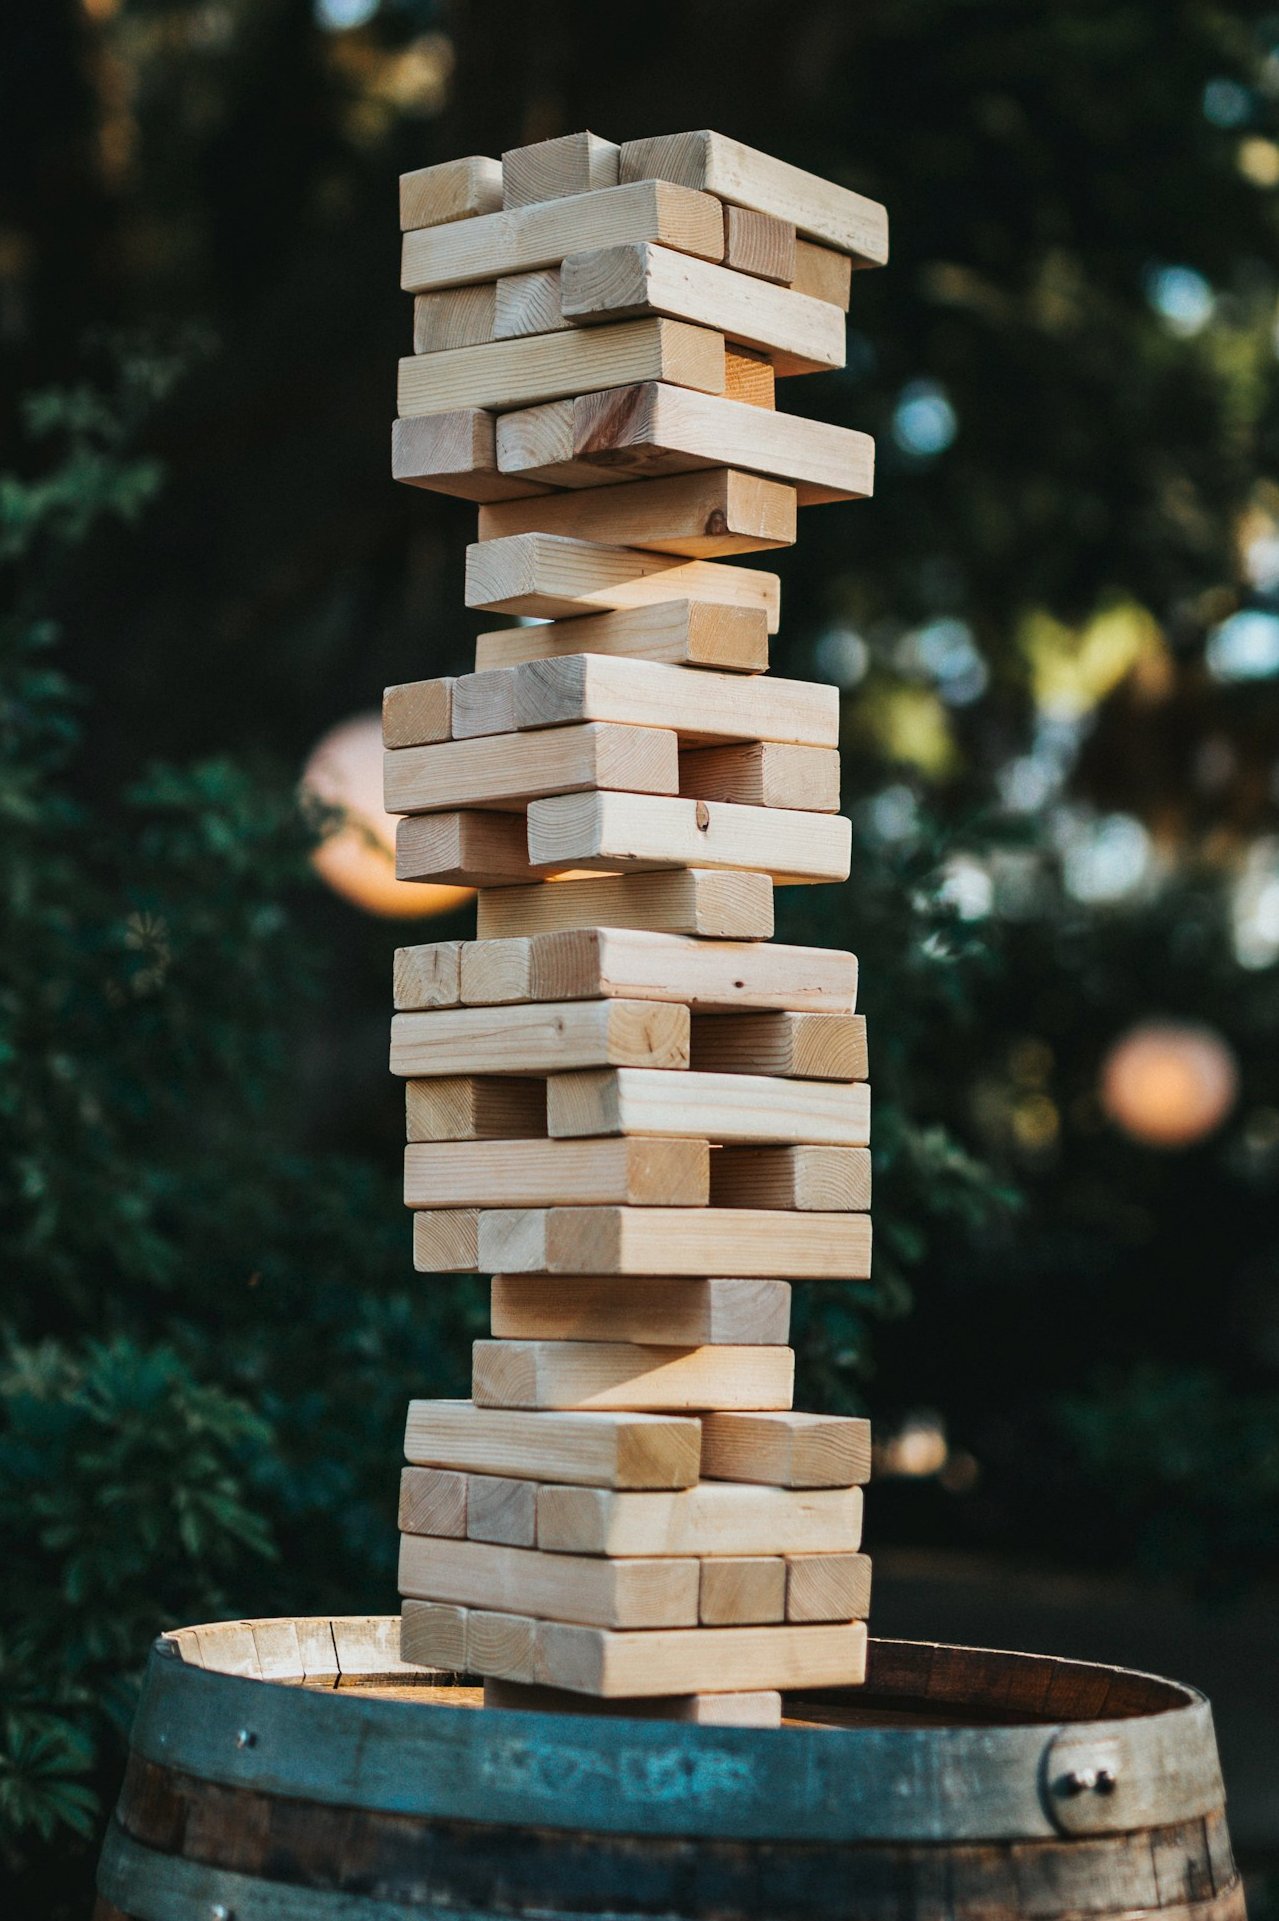 A precarious tower of wooden blocks stacked on top of a barrel. The blocks are arranged as in Jenga.